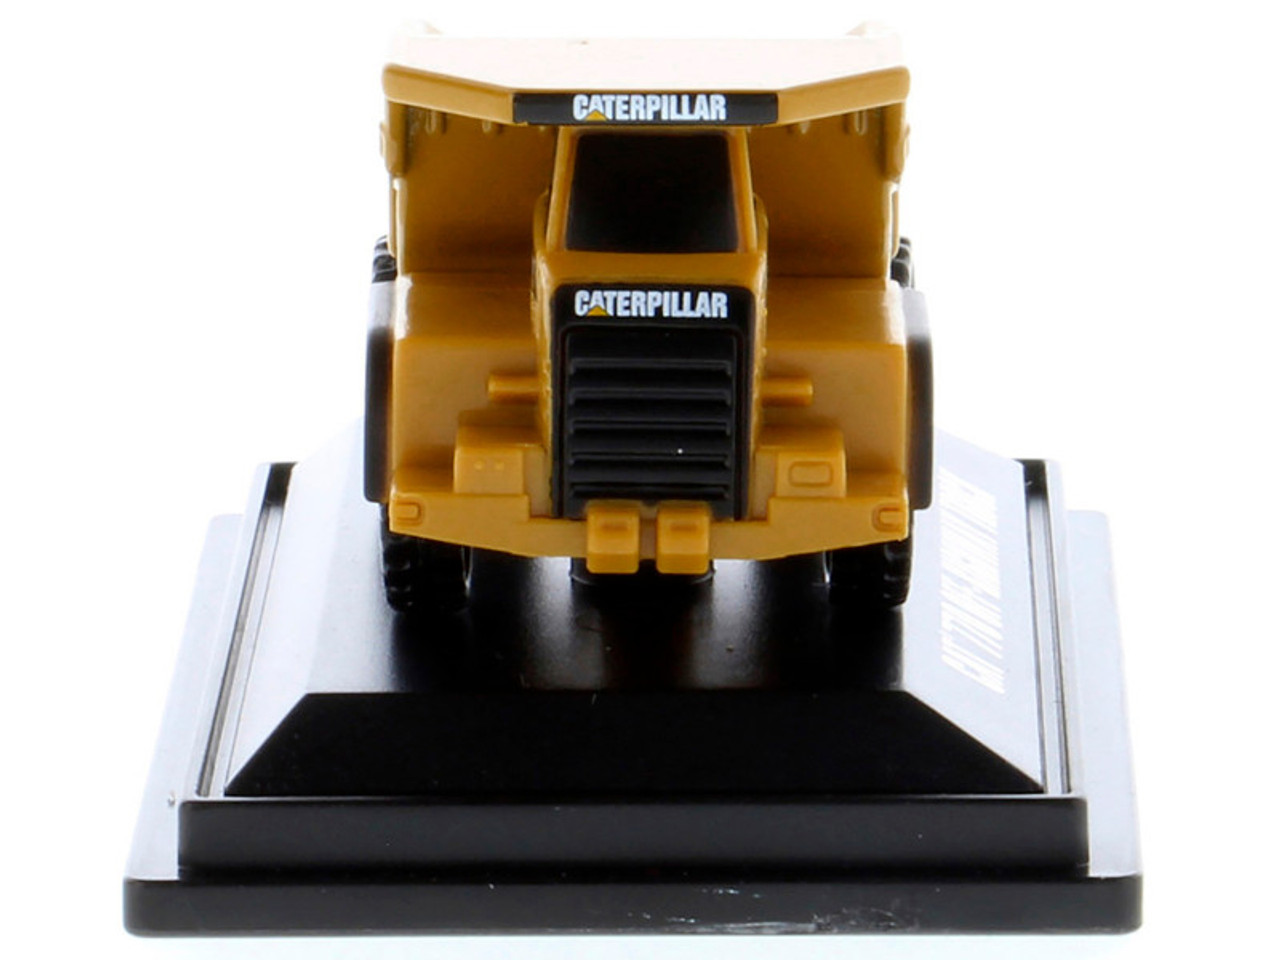 CAT Caterpillar 770 Off–Highway Truck Yellow "Micro-Constructor" Series Diecast Model by Diecast Masters